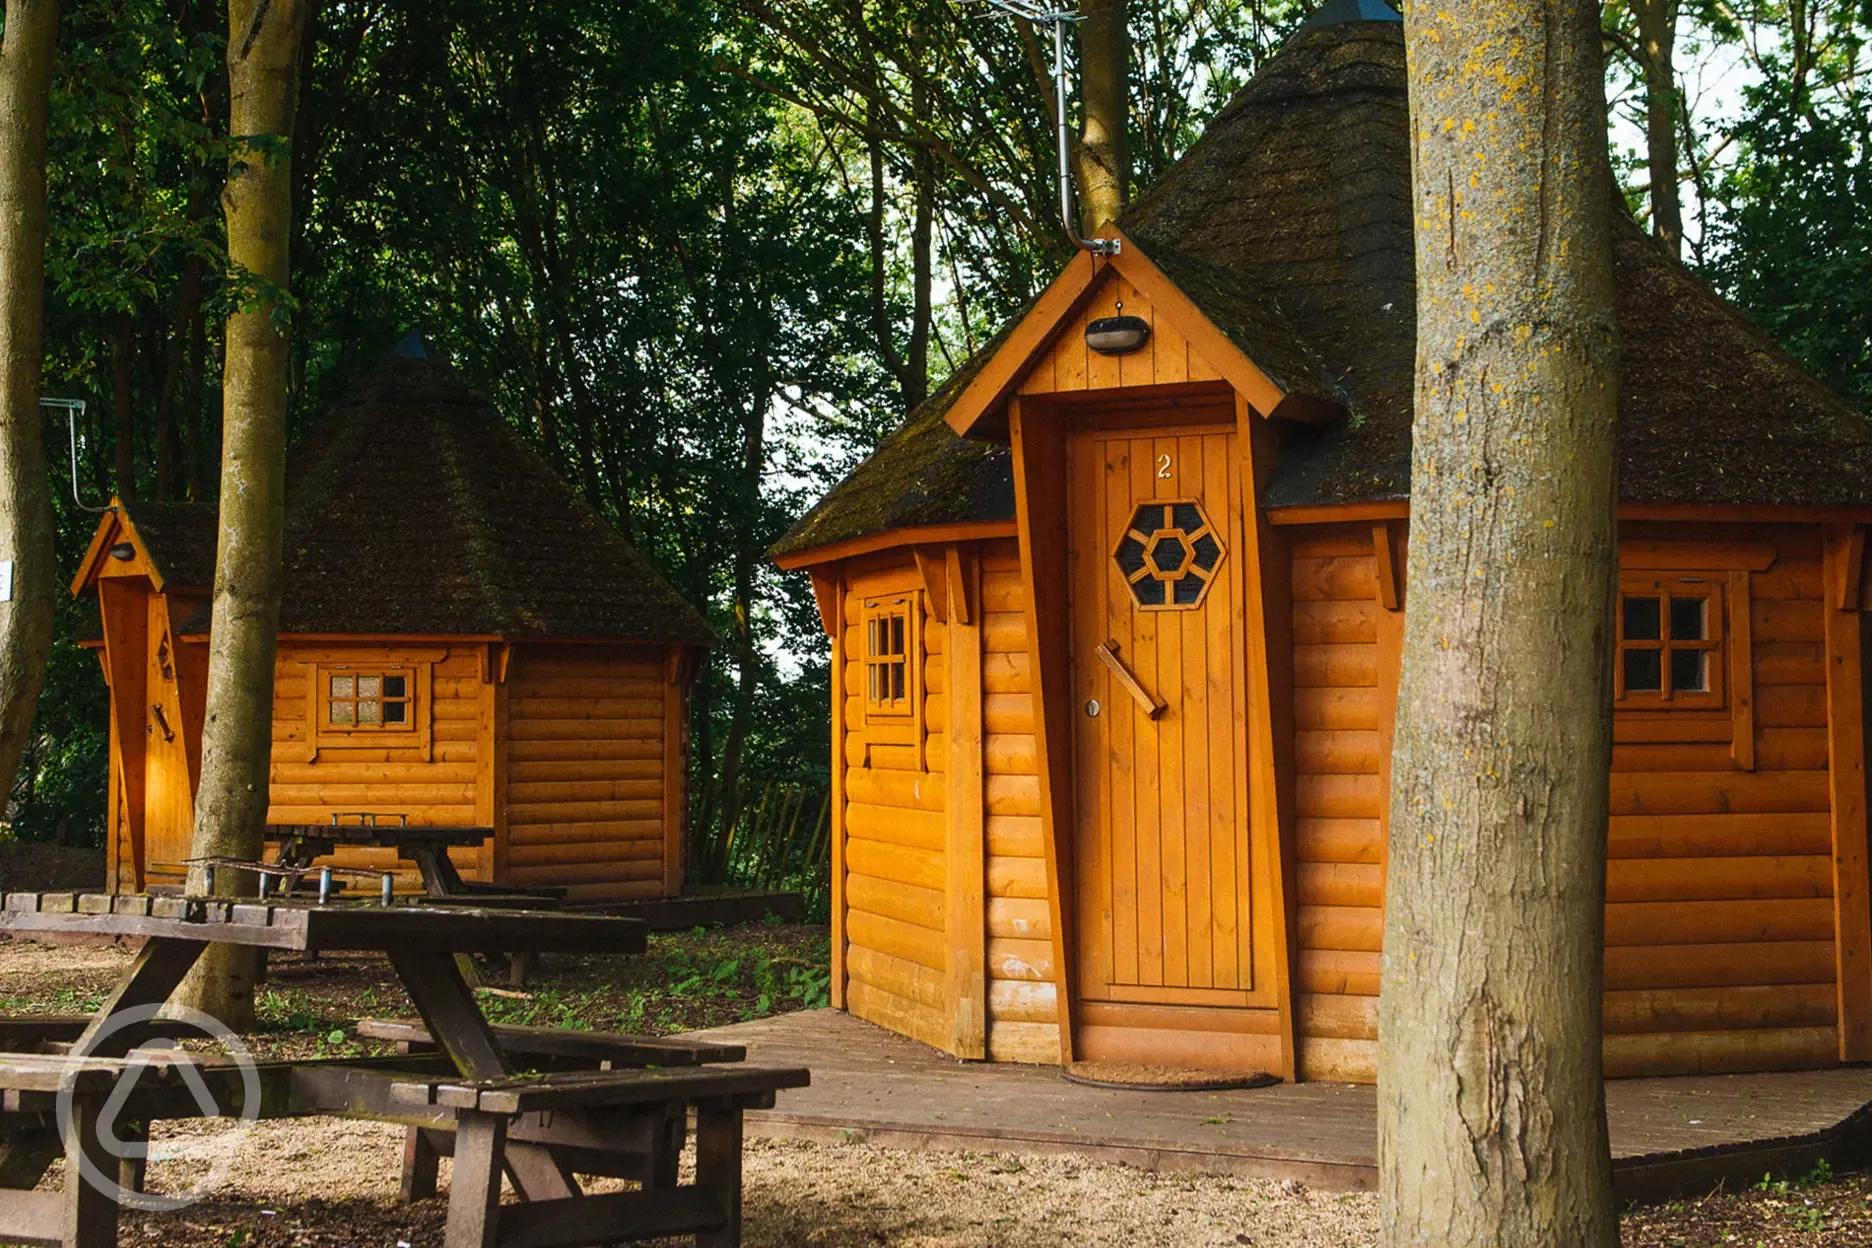 Camping cabins